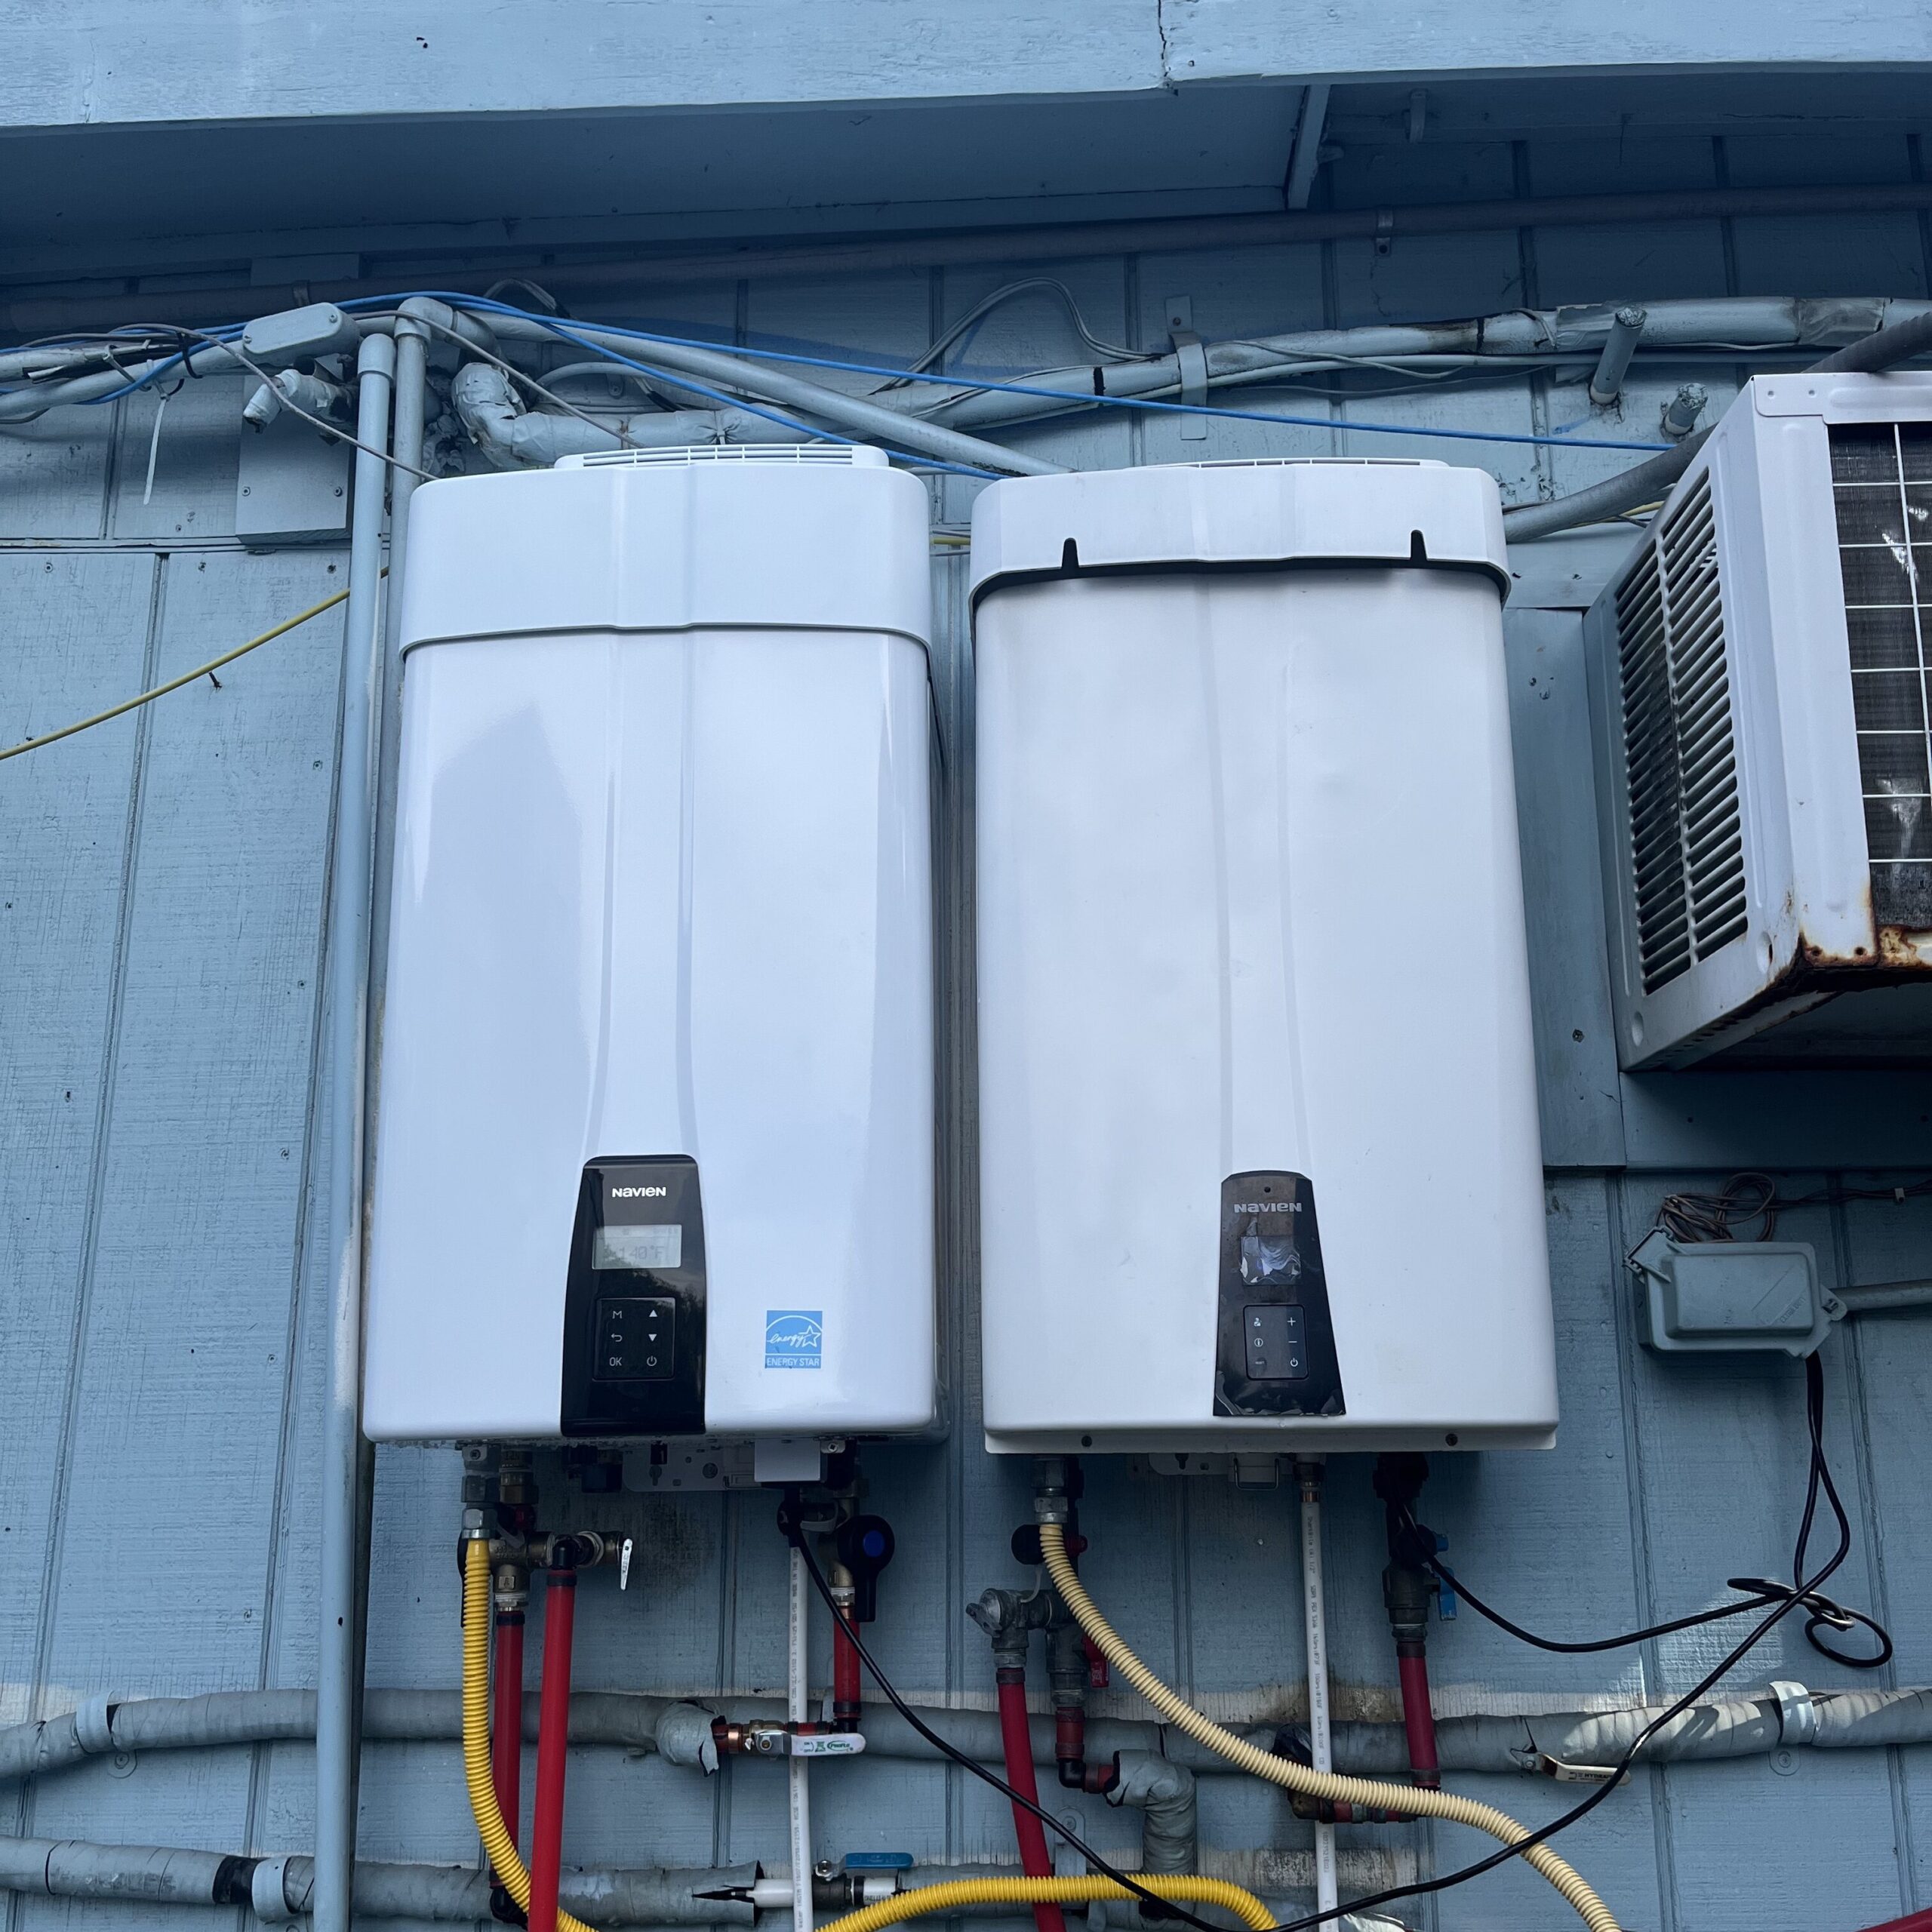 Two tankless water heaters